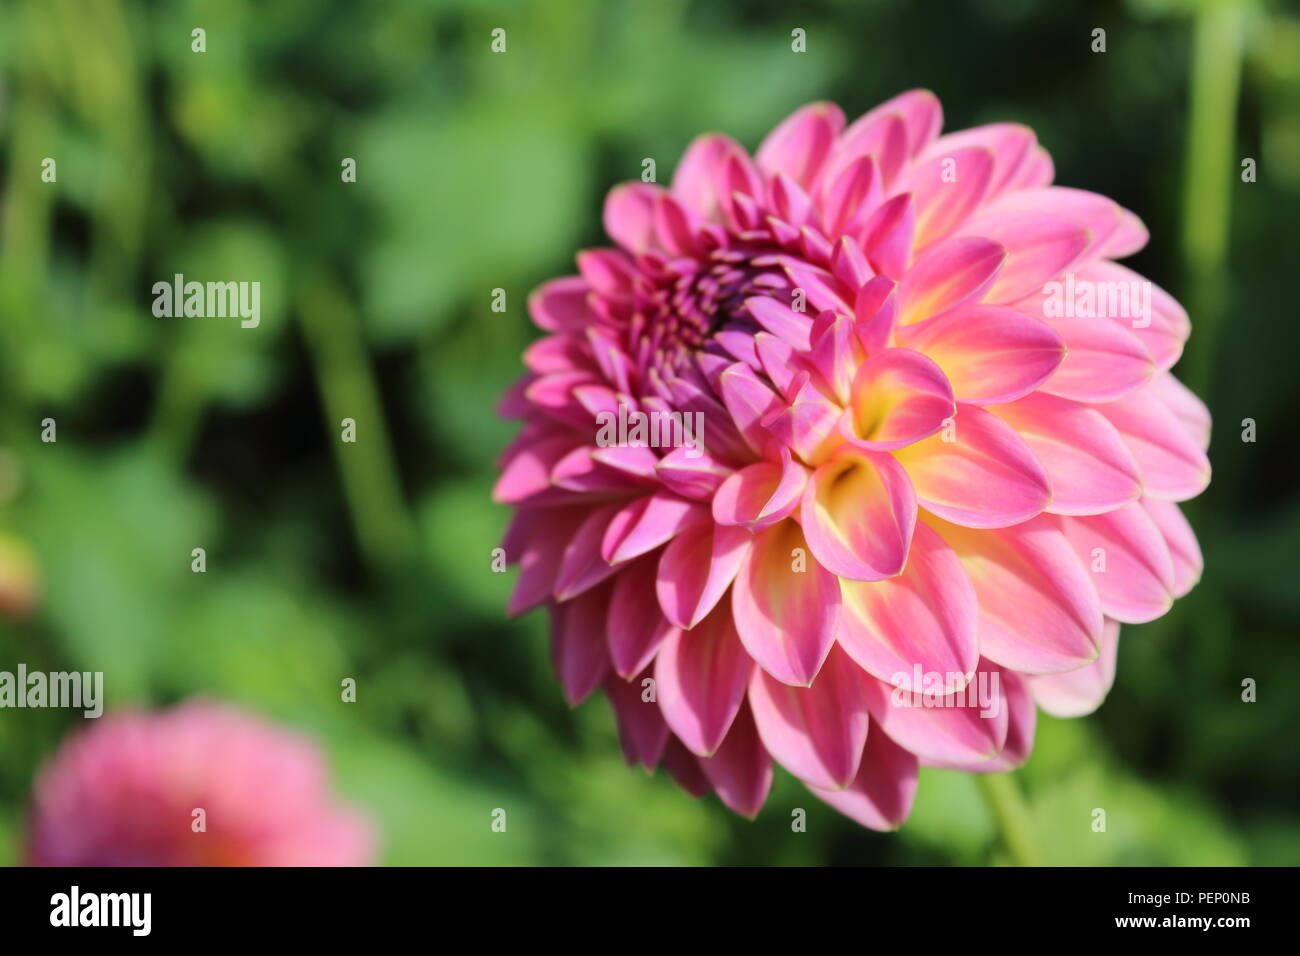 Rosa Dahlie Blume pink suffusion in Blume Stockfoto